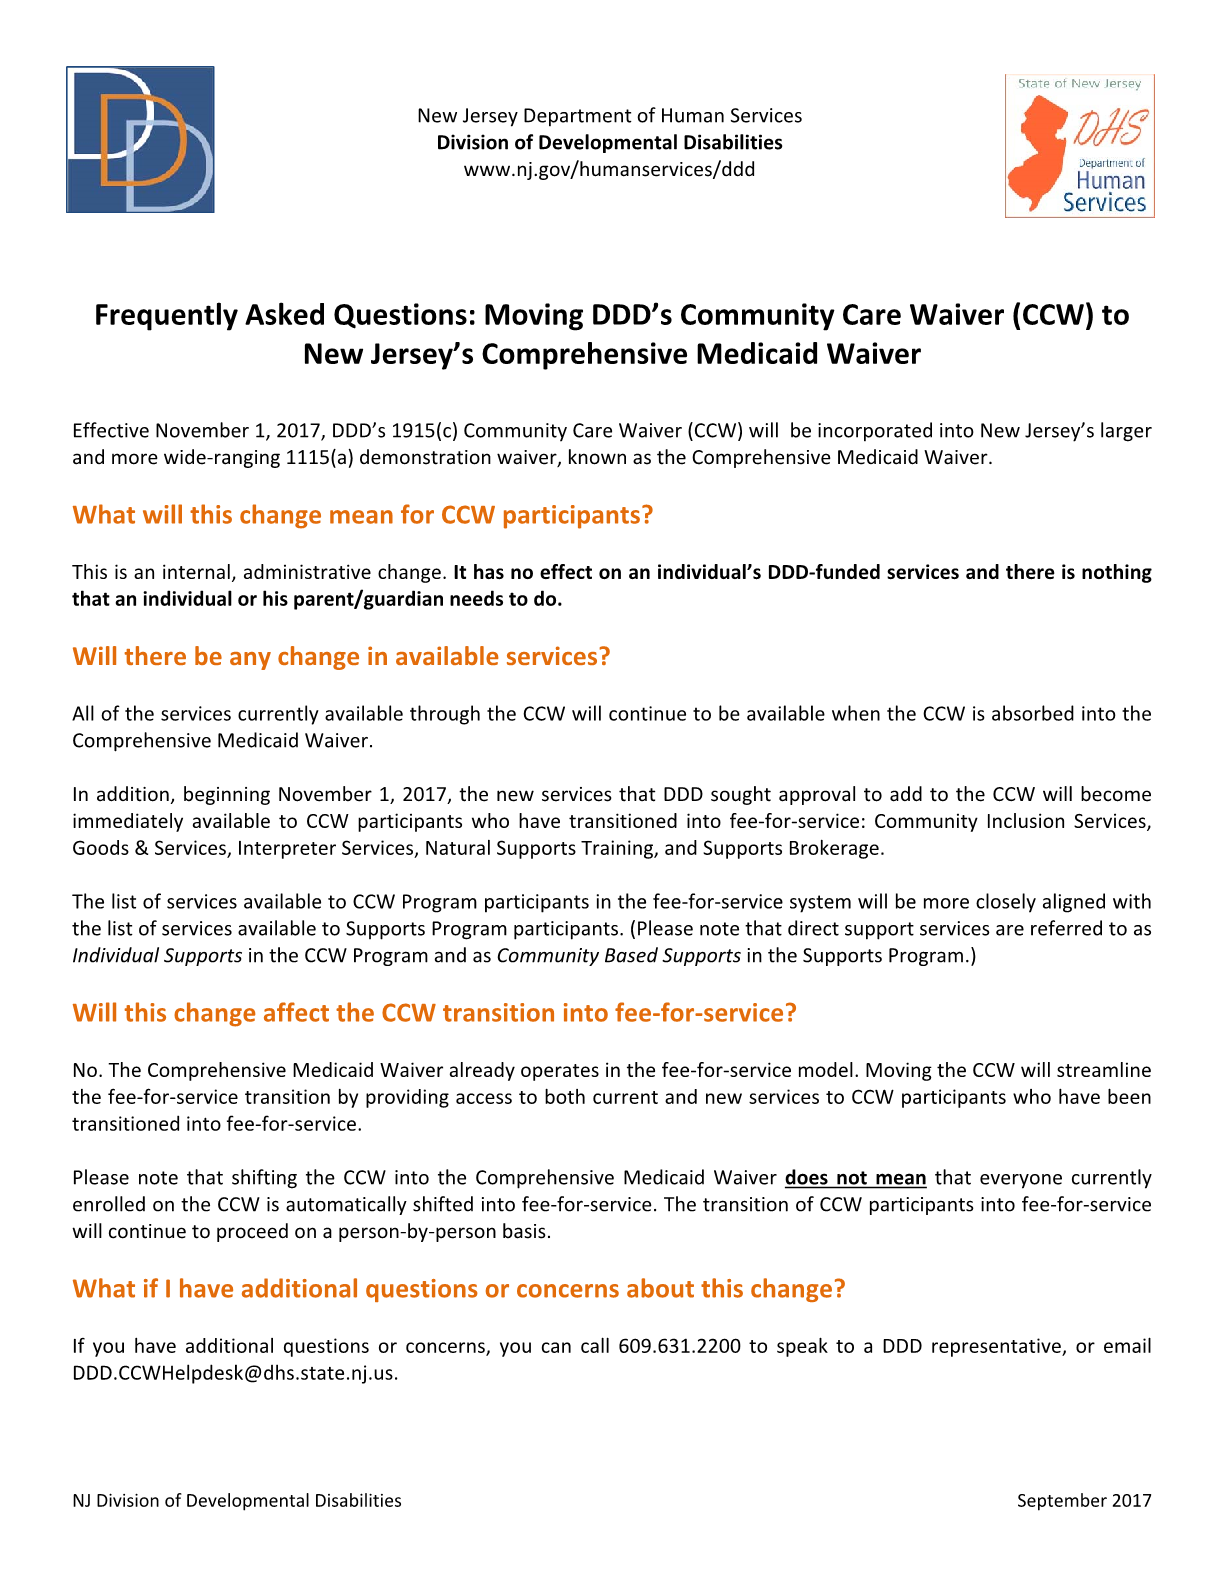 Frequently Asked Questions: Moving DDD’s Community Care Waiver (CCW) to New Jersey’s Comprehensive Medicaid Waiver